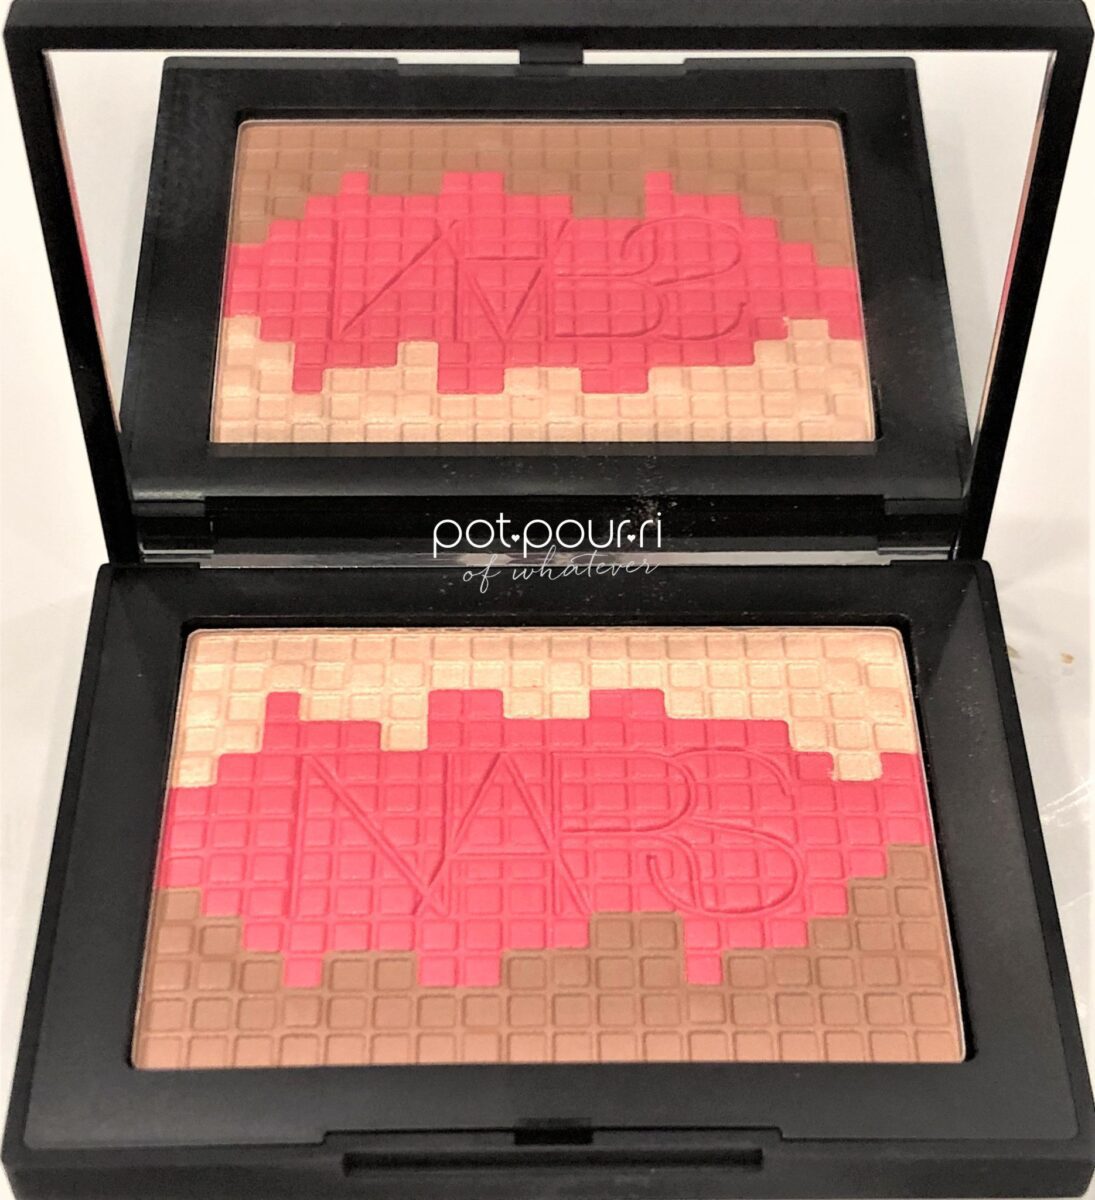 center blush takes up more space, leaving little space for highlighter and bronzer